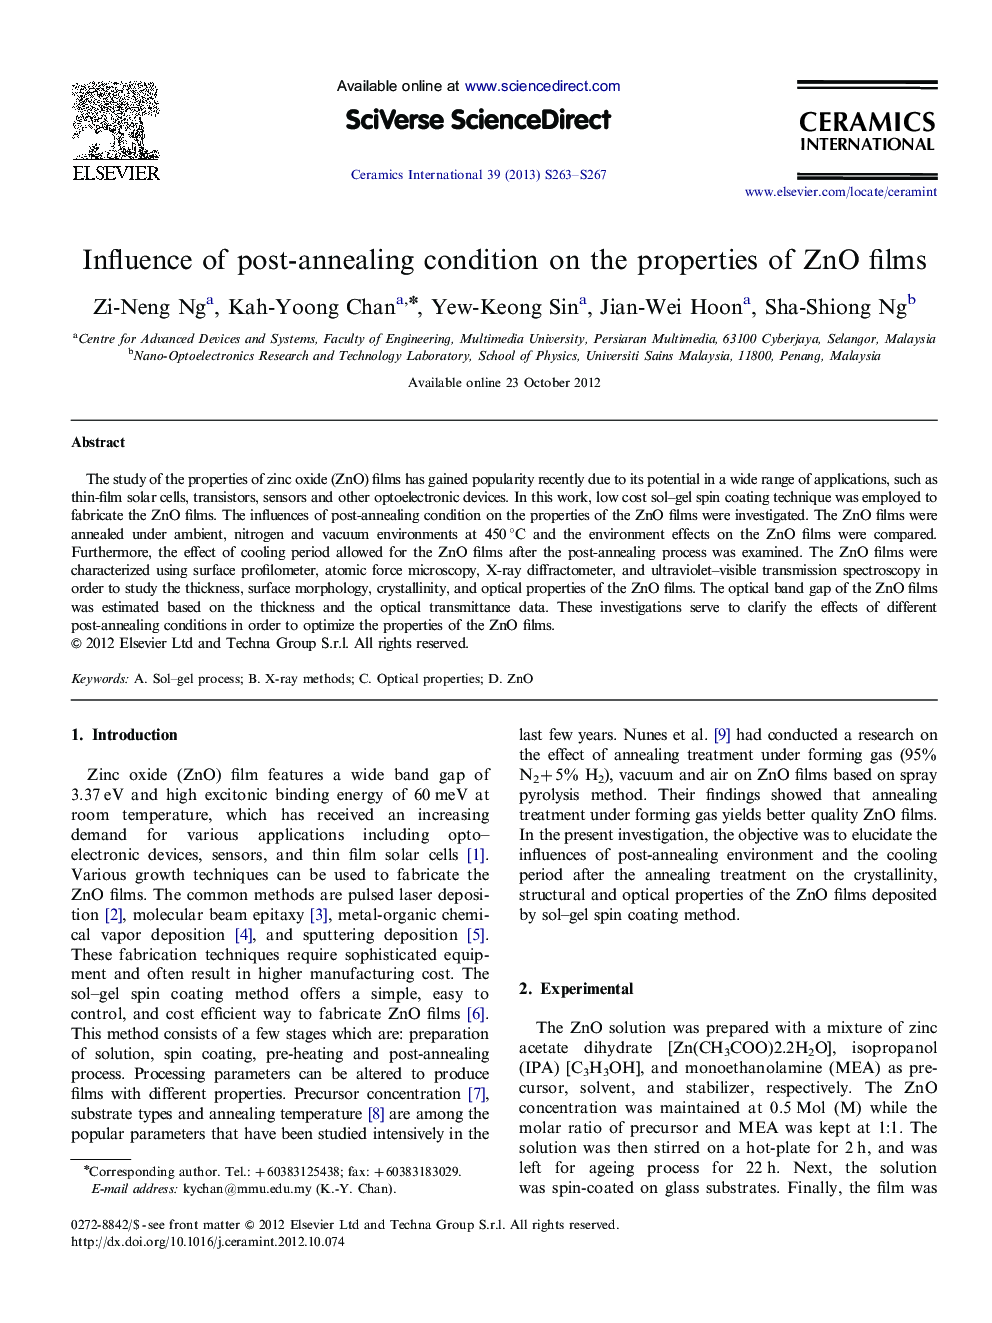 Influence of post-annealing condition on the properties of ZnO films